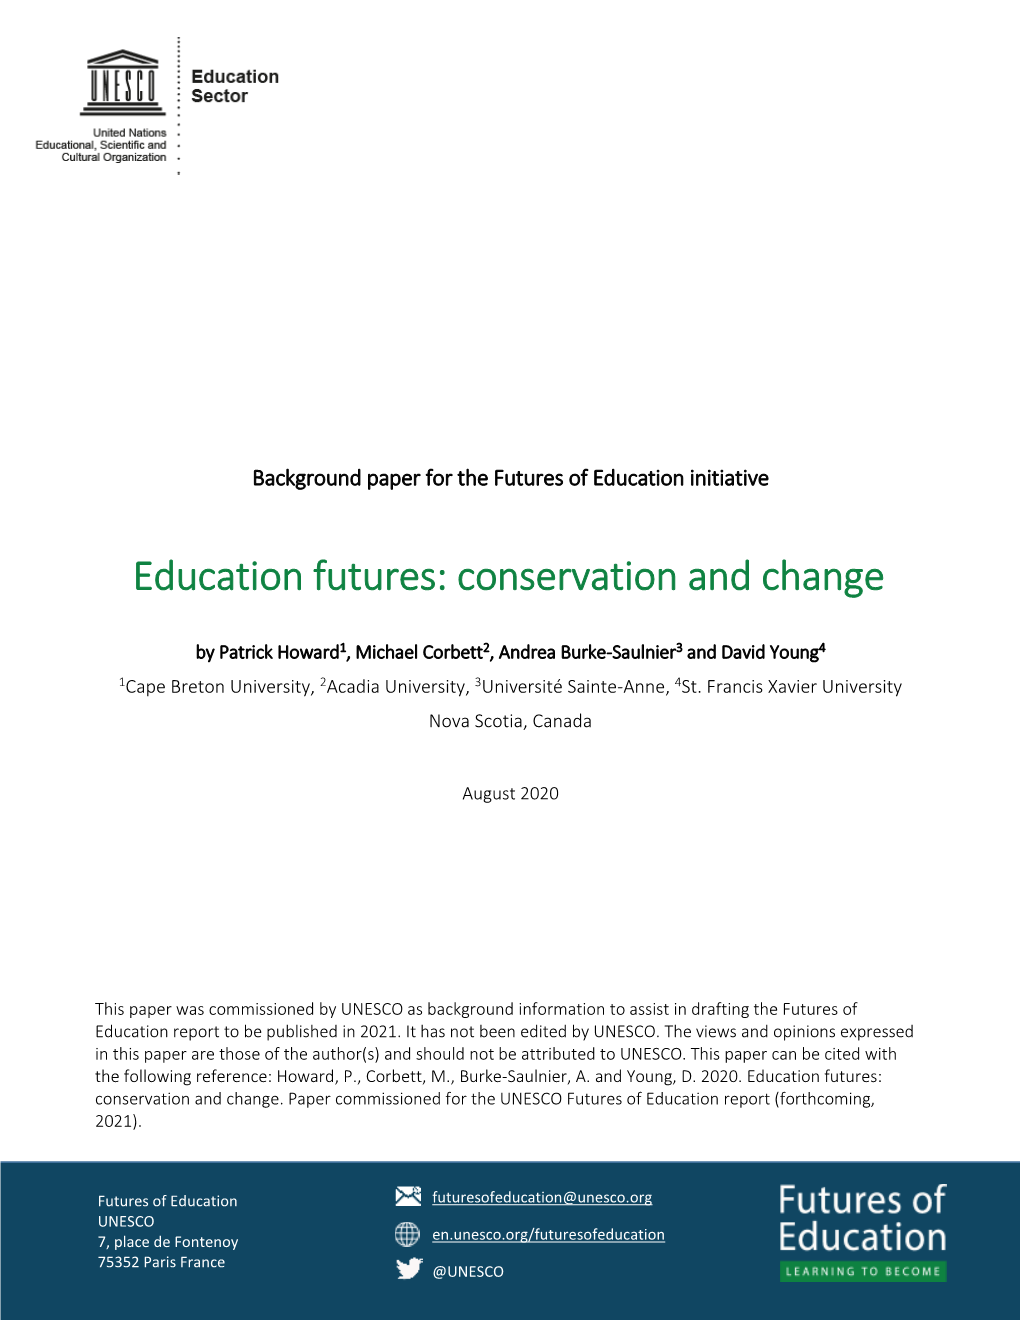 Education Futures: Conservation and Change